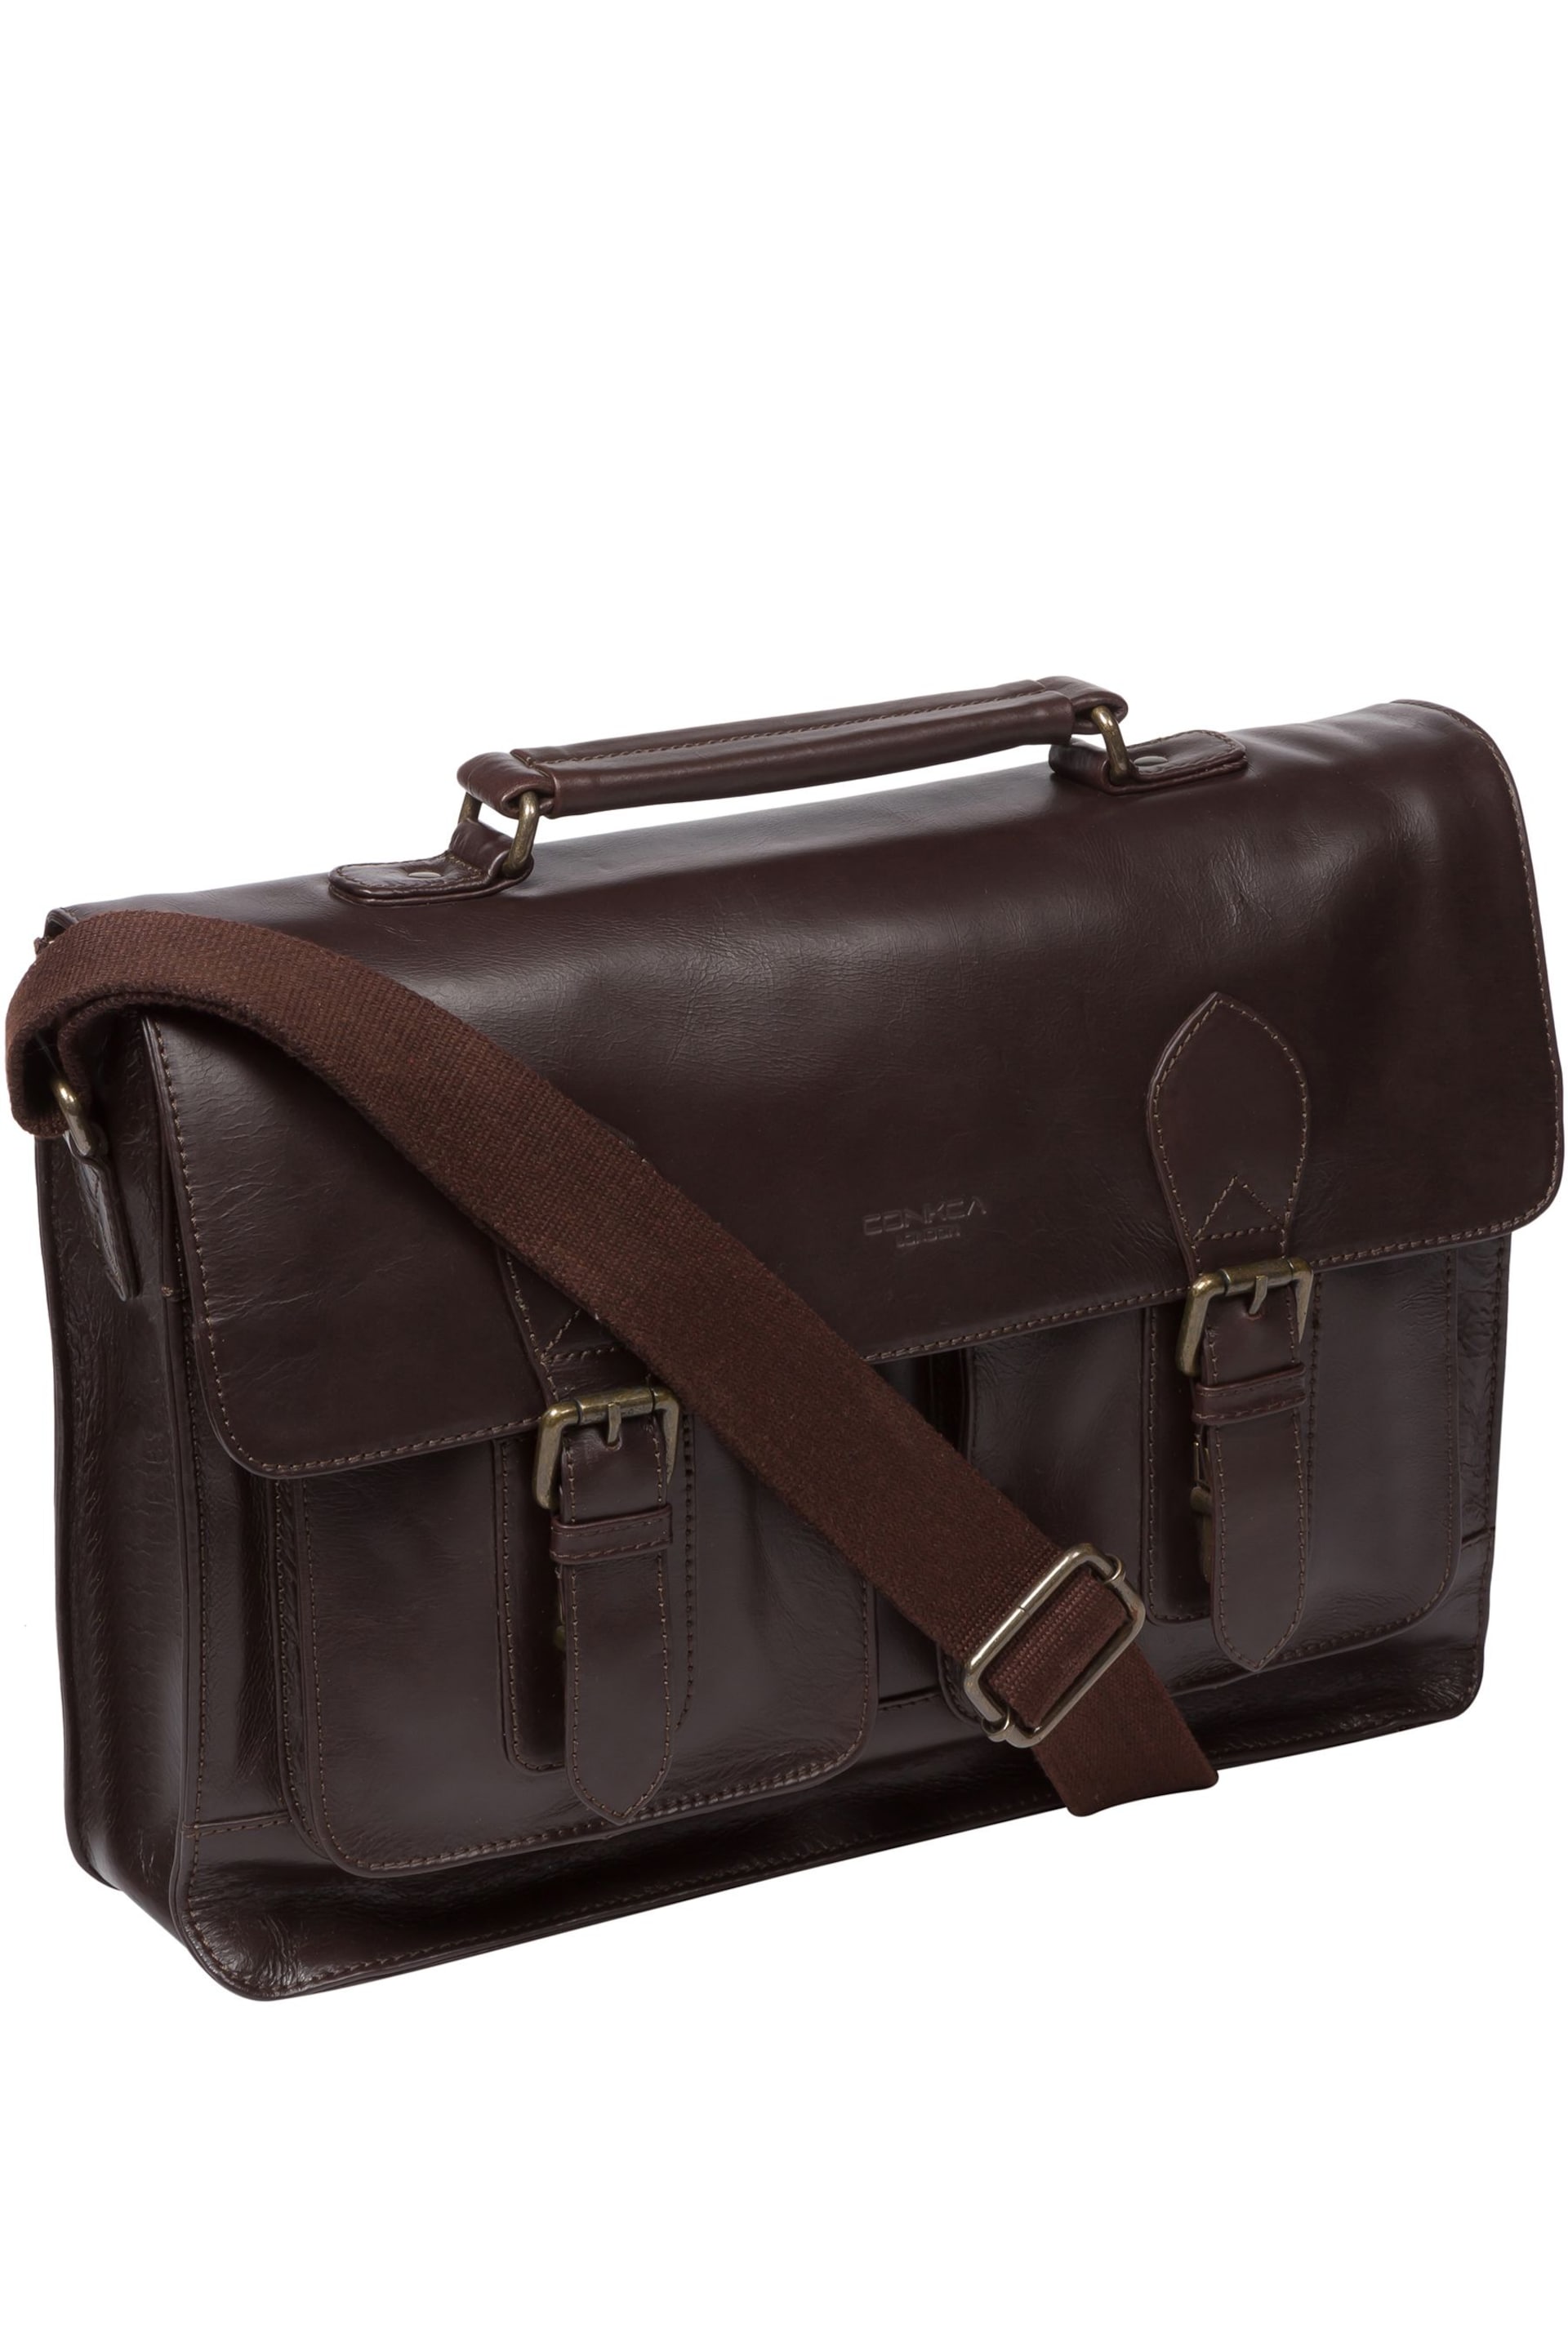 Conkca Pinter Leather Work Bag - Image 4 of 8